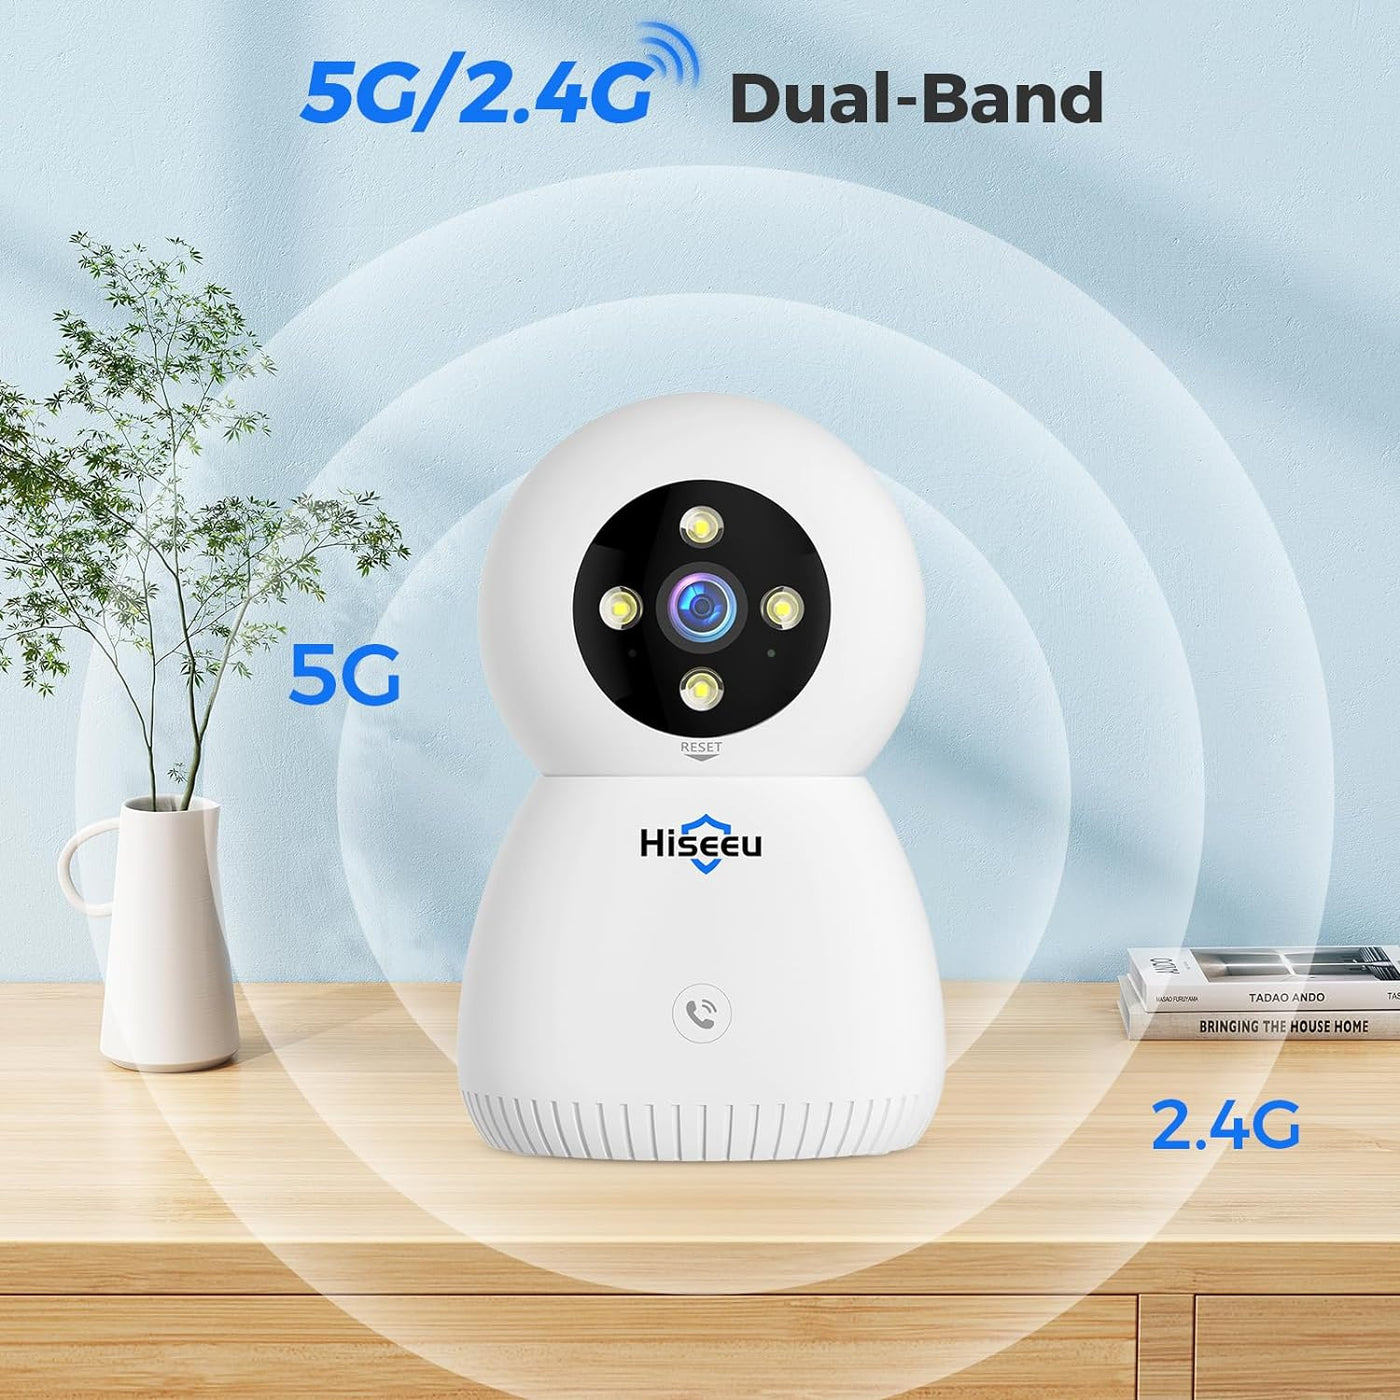 Hiseeu Indoor Security Camera, 2.4G/5G 5MP Baby Monitor Pet Camera for Home Security, PTZ 360°, Auto Tracking, 2 Way Audio, Night Vision, PIR Detection, Local Storage